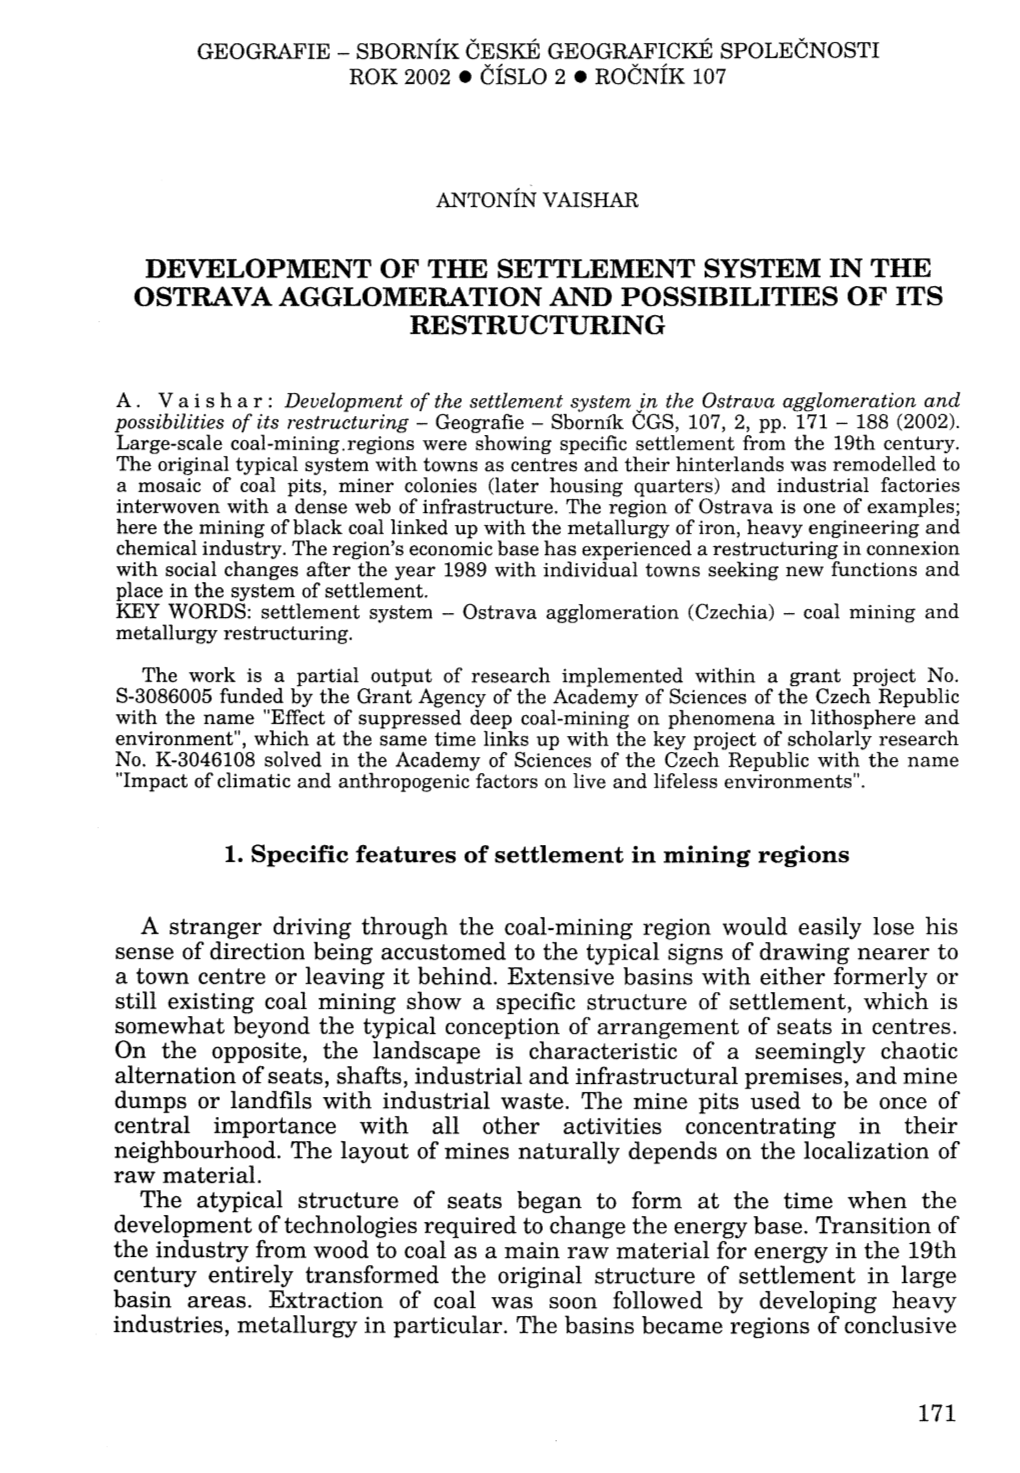 Development of the Settlement System in the Ostrava Agglomeration and Possibilities of Its Restructuring